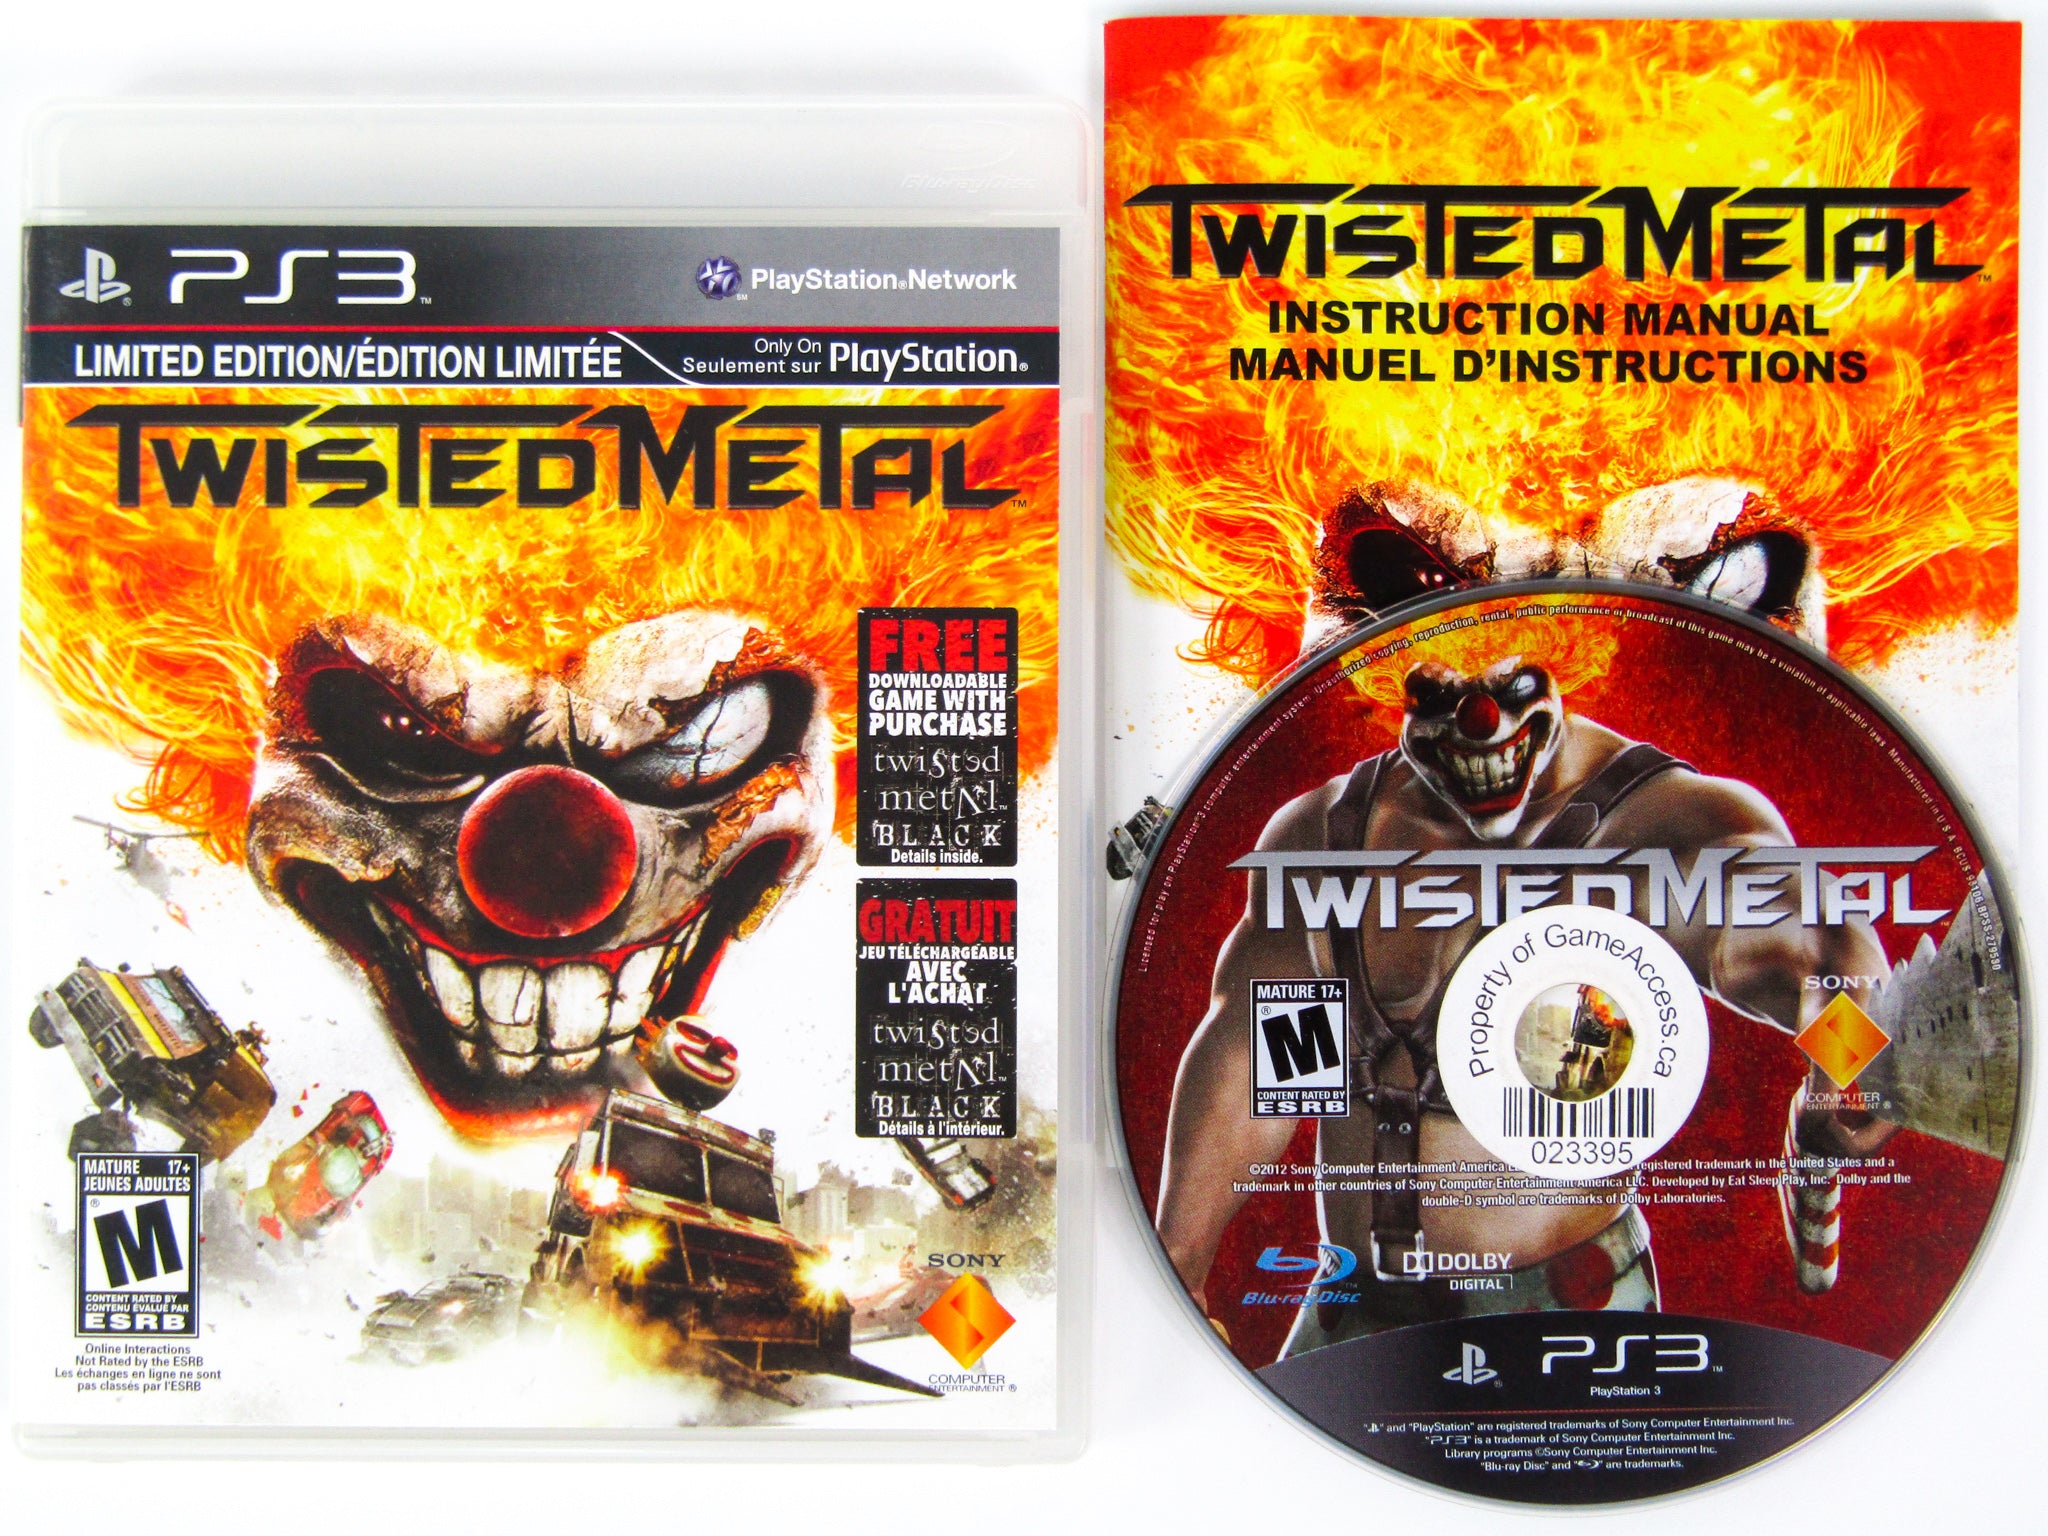 Twisted Metal - Limited Edition (Sony PlayStation 3, 2012) for